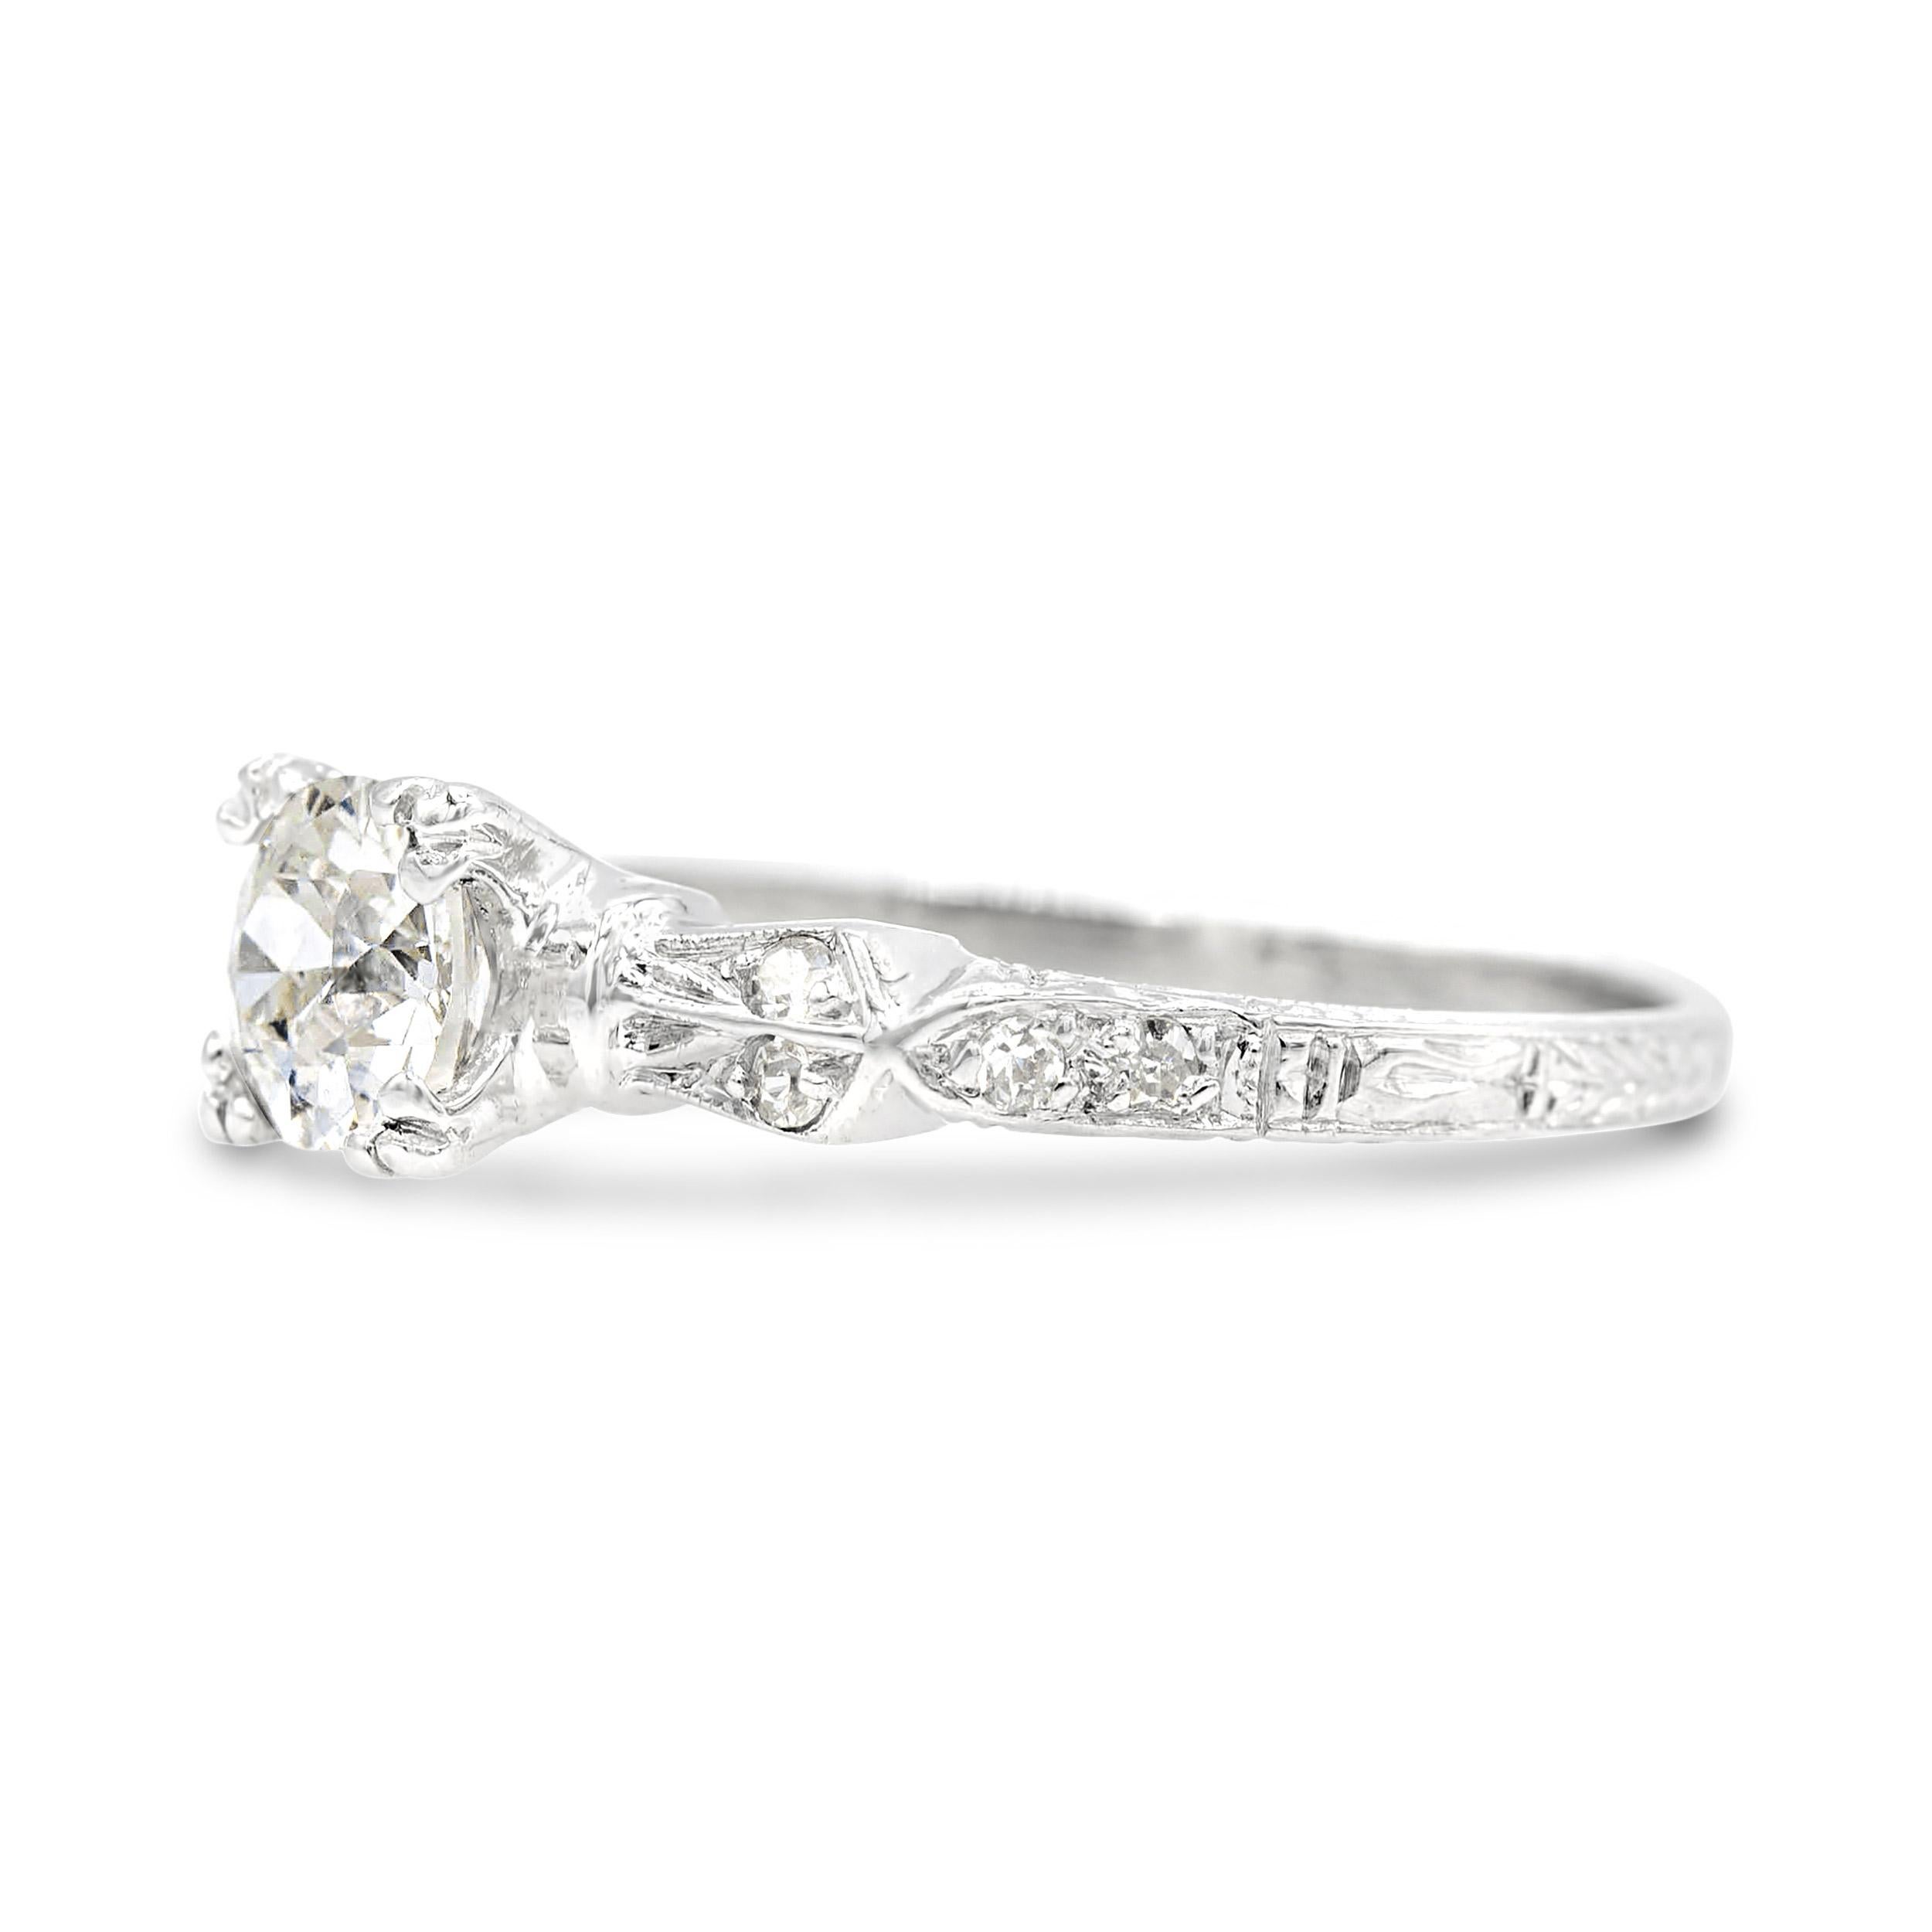 The revel is in the details of this distinctly Art Deco diamond engagement ring. At the center of the platinum crafted ring, a chunky half-carat old European diamond with a small table faces bright and white, appearing larger than its graded size.